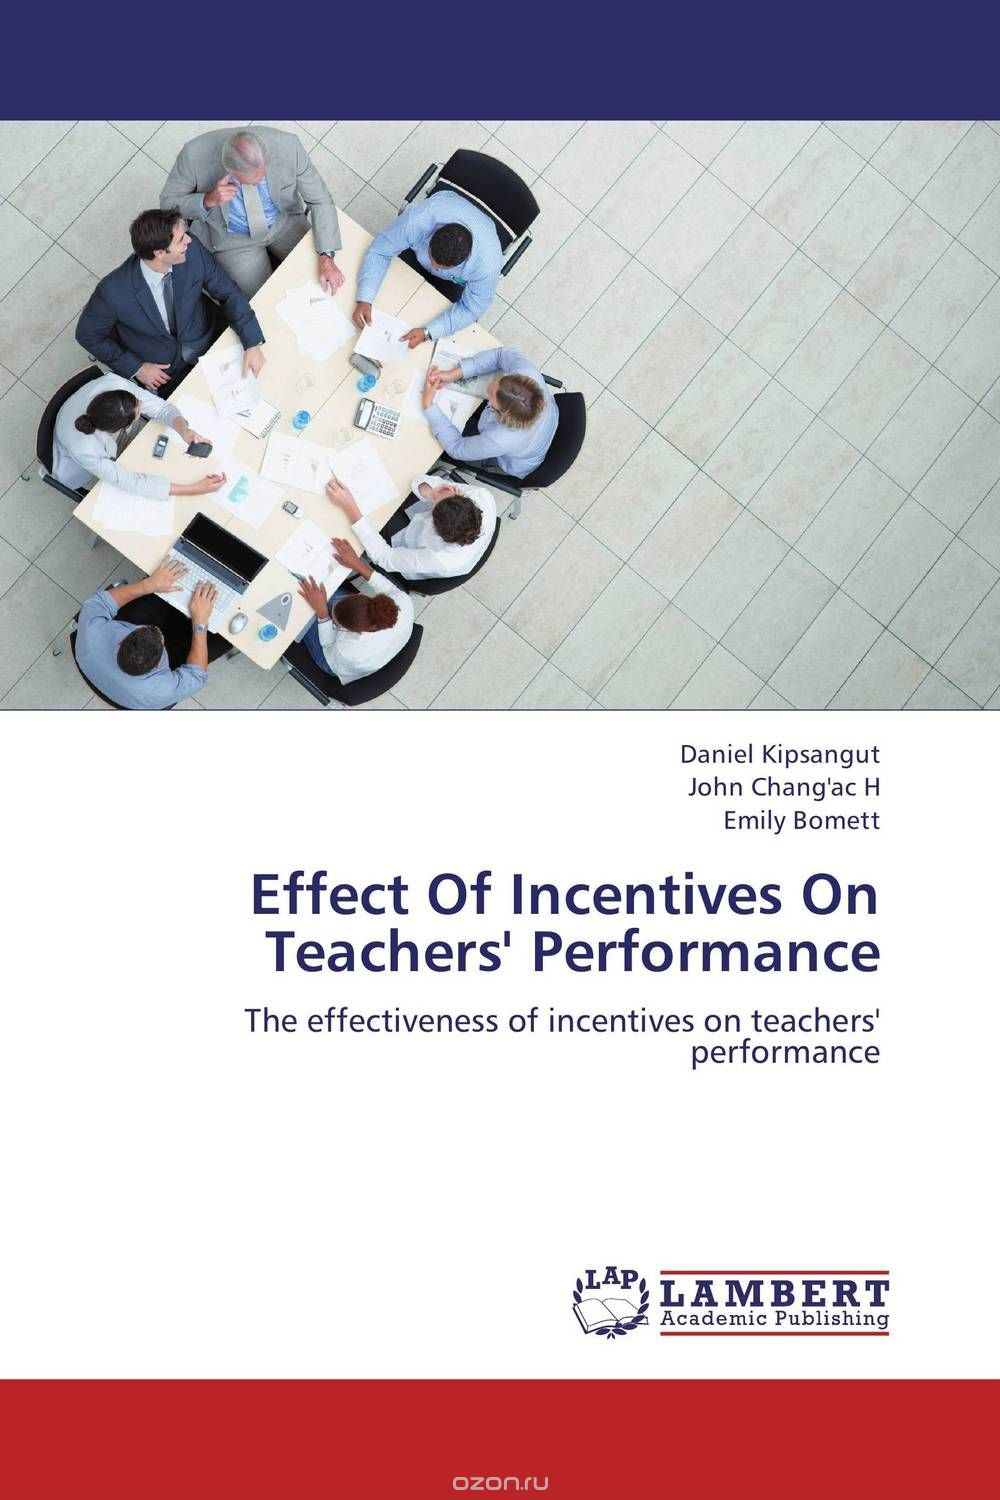 Effect Of Incentives On Teachers' Performance